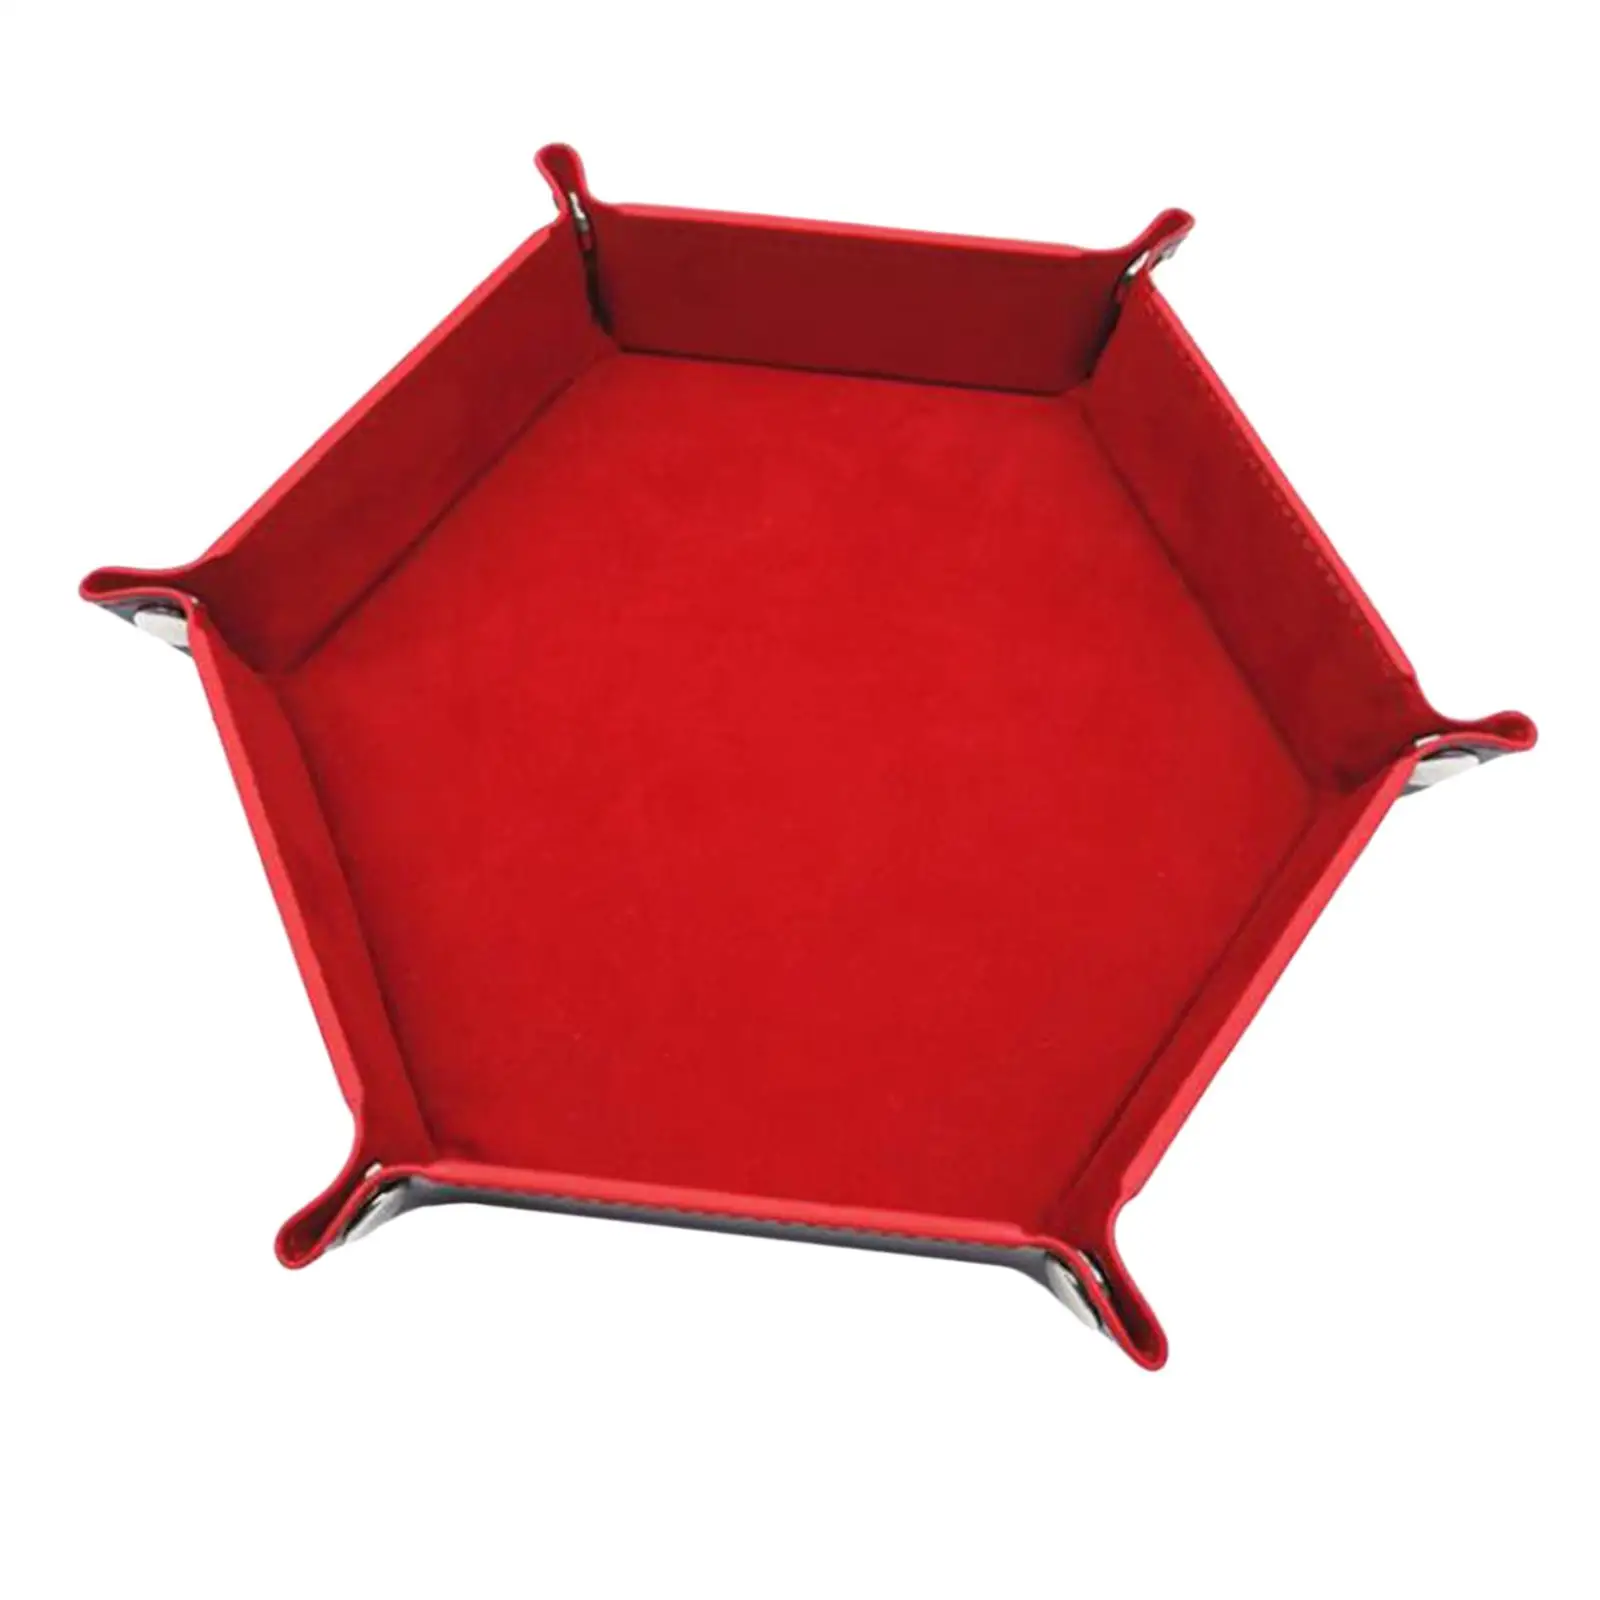  Tray Double Sided Portable Durable for Accessories Candies Jewelry